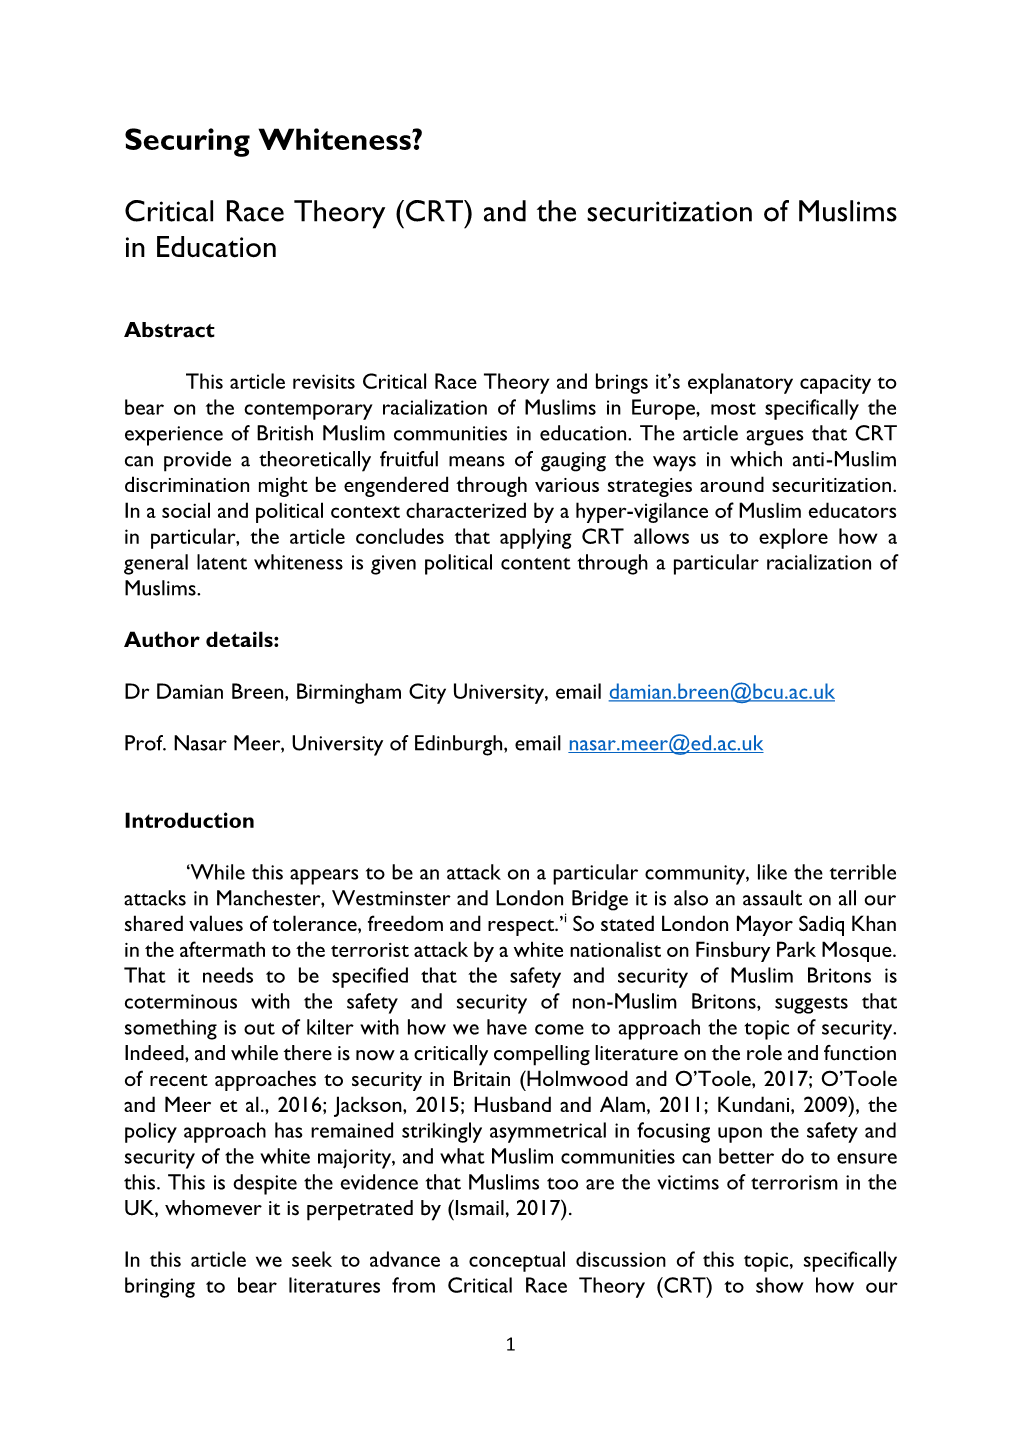 Critical Race Theory (CRT) and the Securitization of Muslims in Education